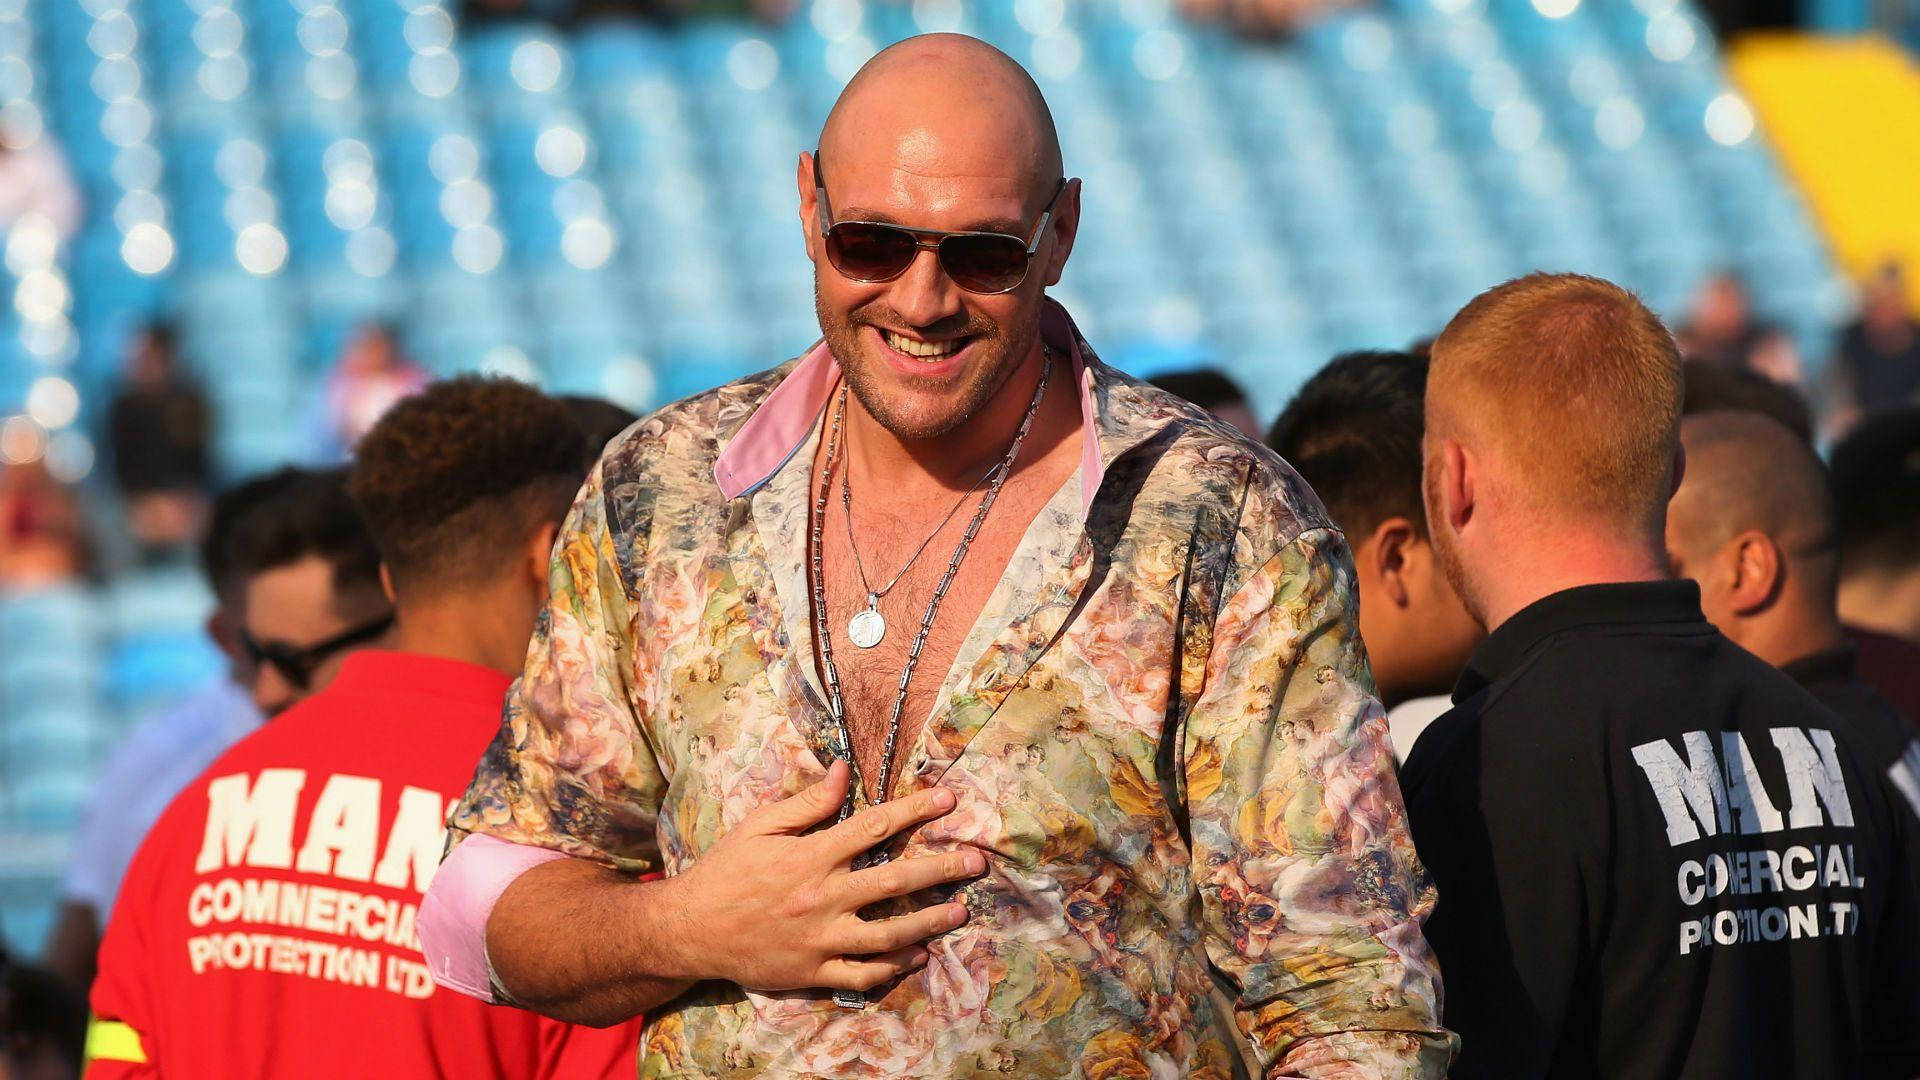 Tyson Fury As Cheerful Person Background